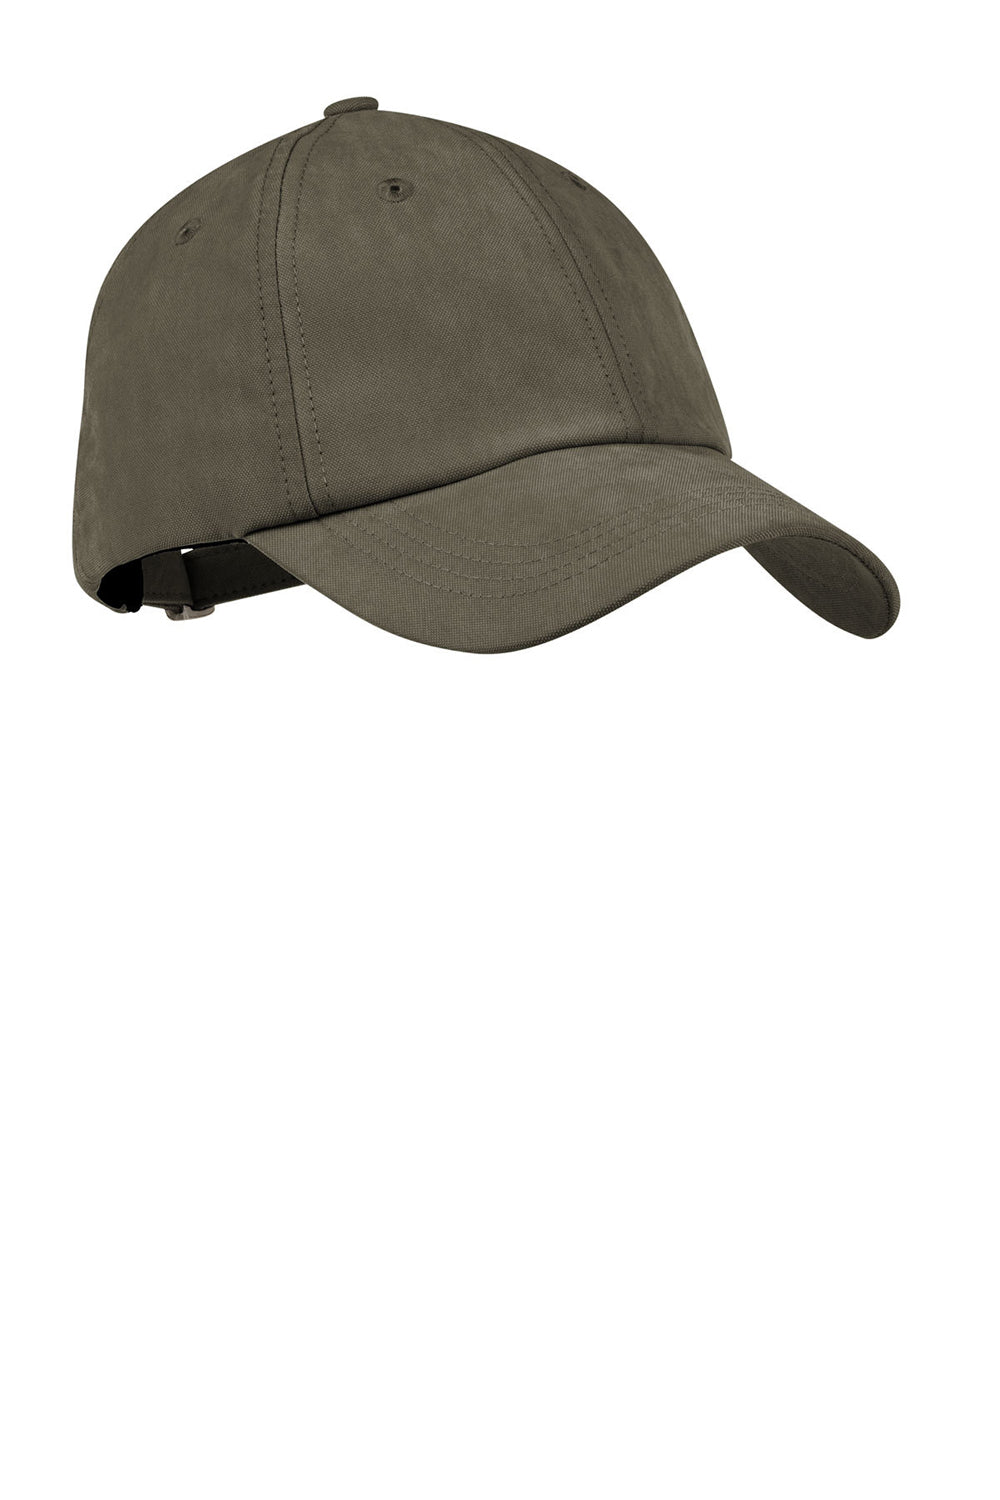 Port Authority C850 Mens Moisture Wicking Adjustable Hat Olive Green Front